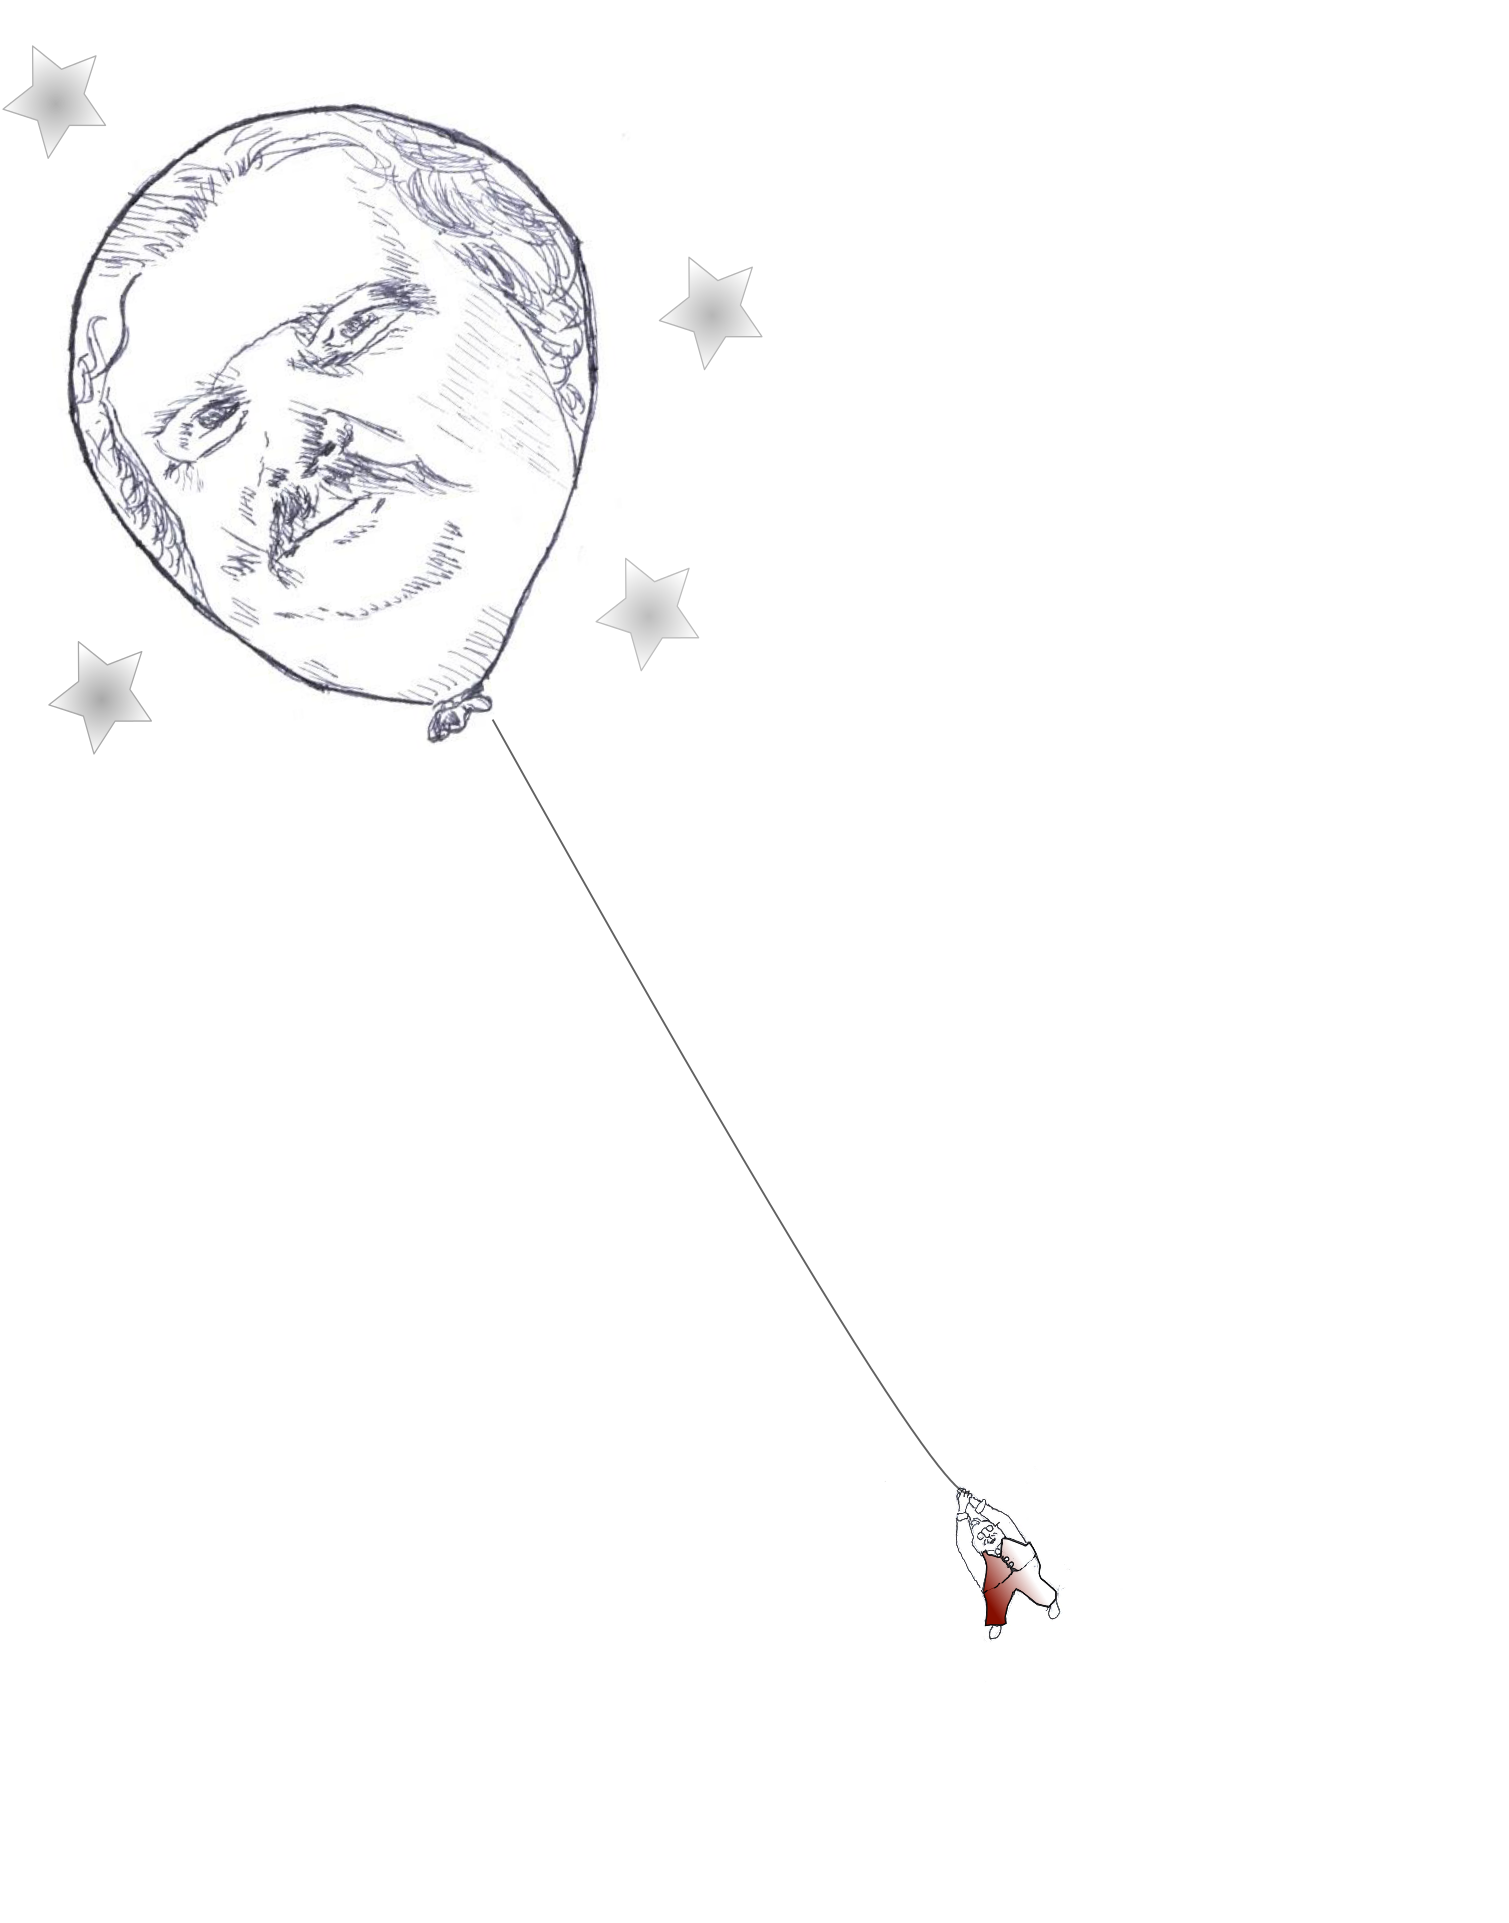 Illustration of Chesterton hanging onto a balloon that looks like his face